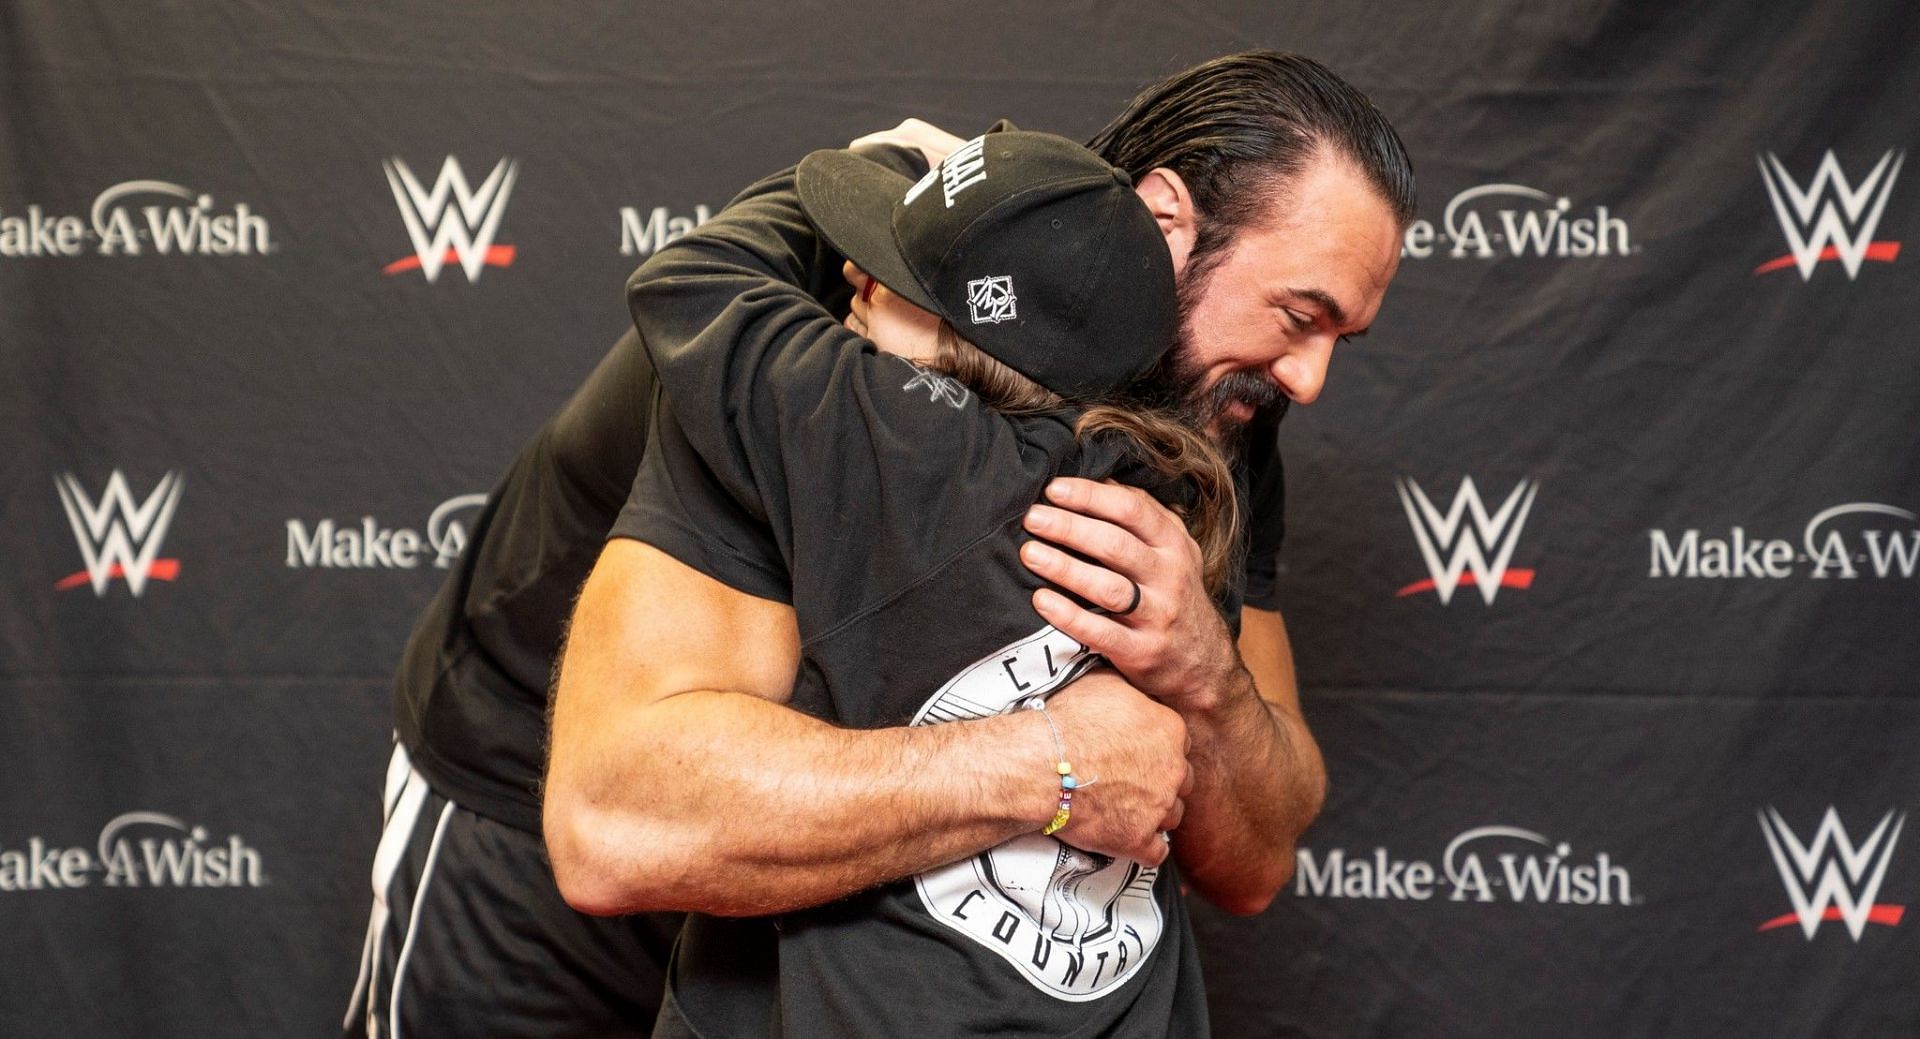 WWE honored 16-year-old Make-A-Wish Kid Giovanna